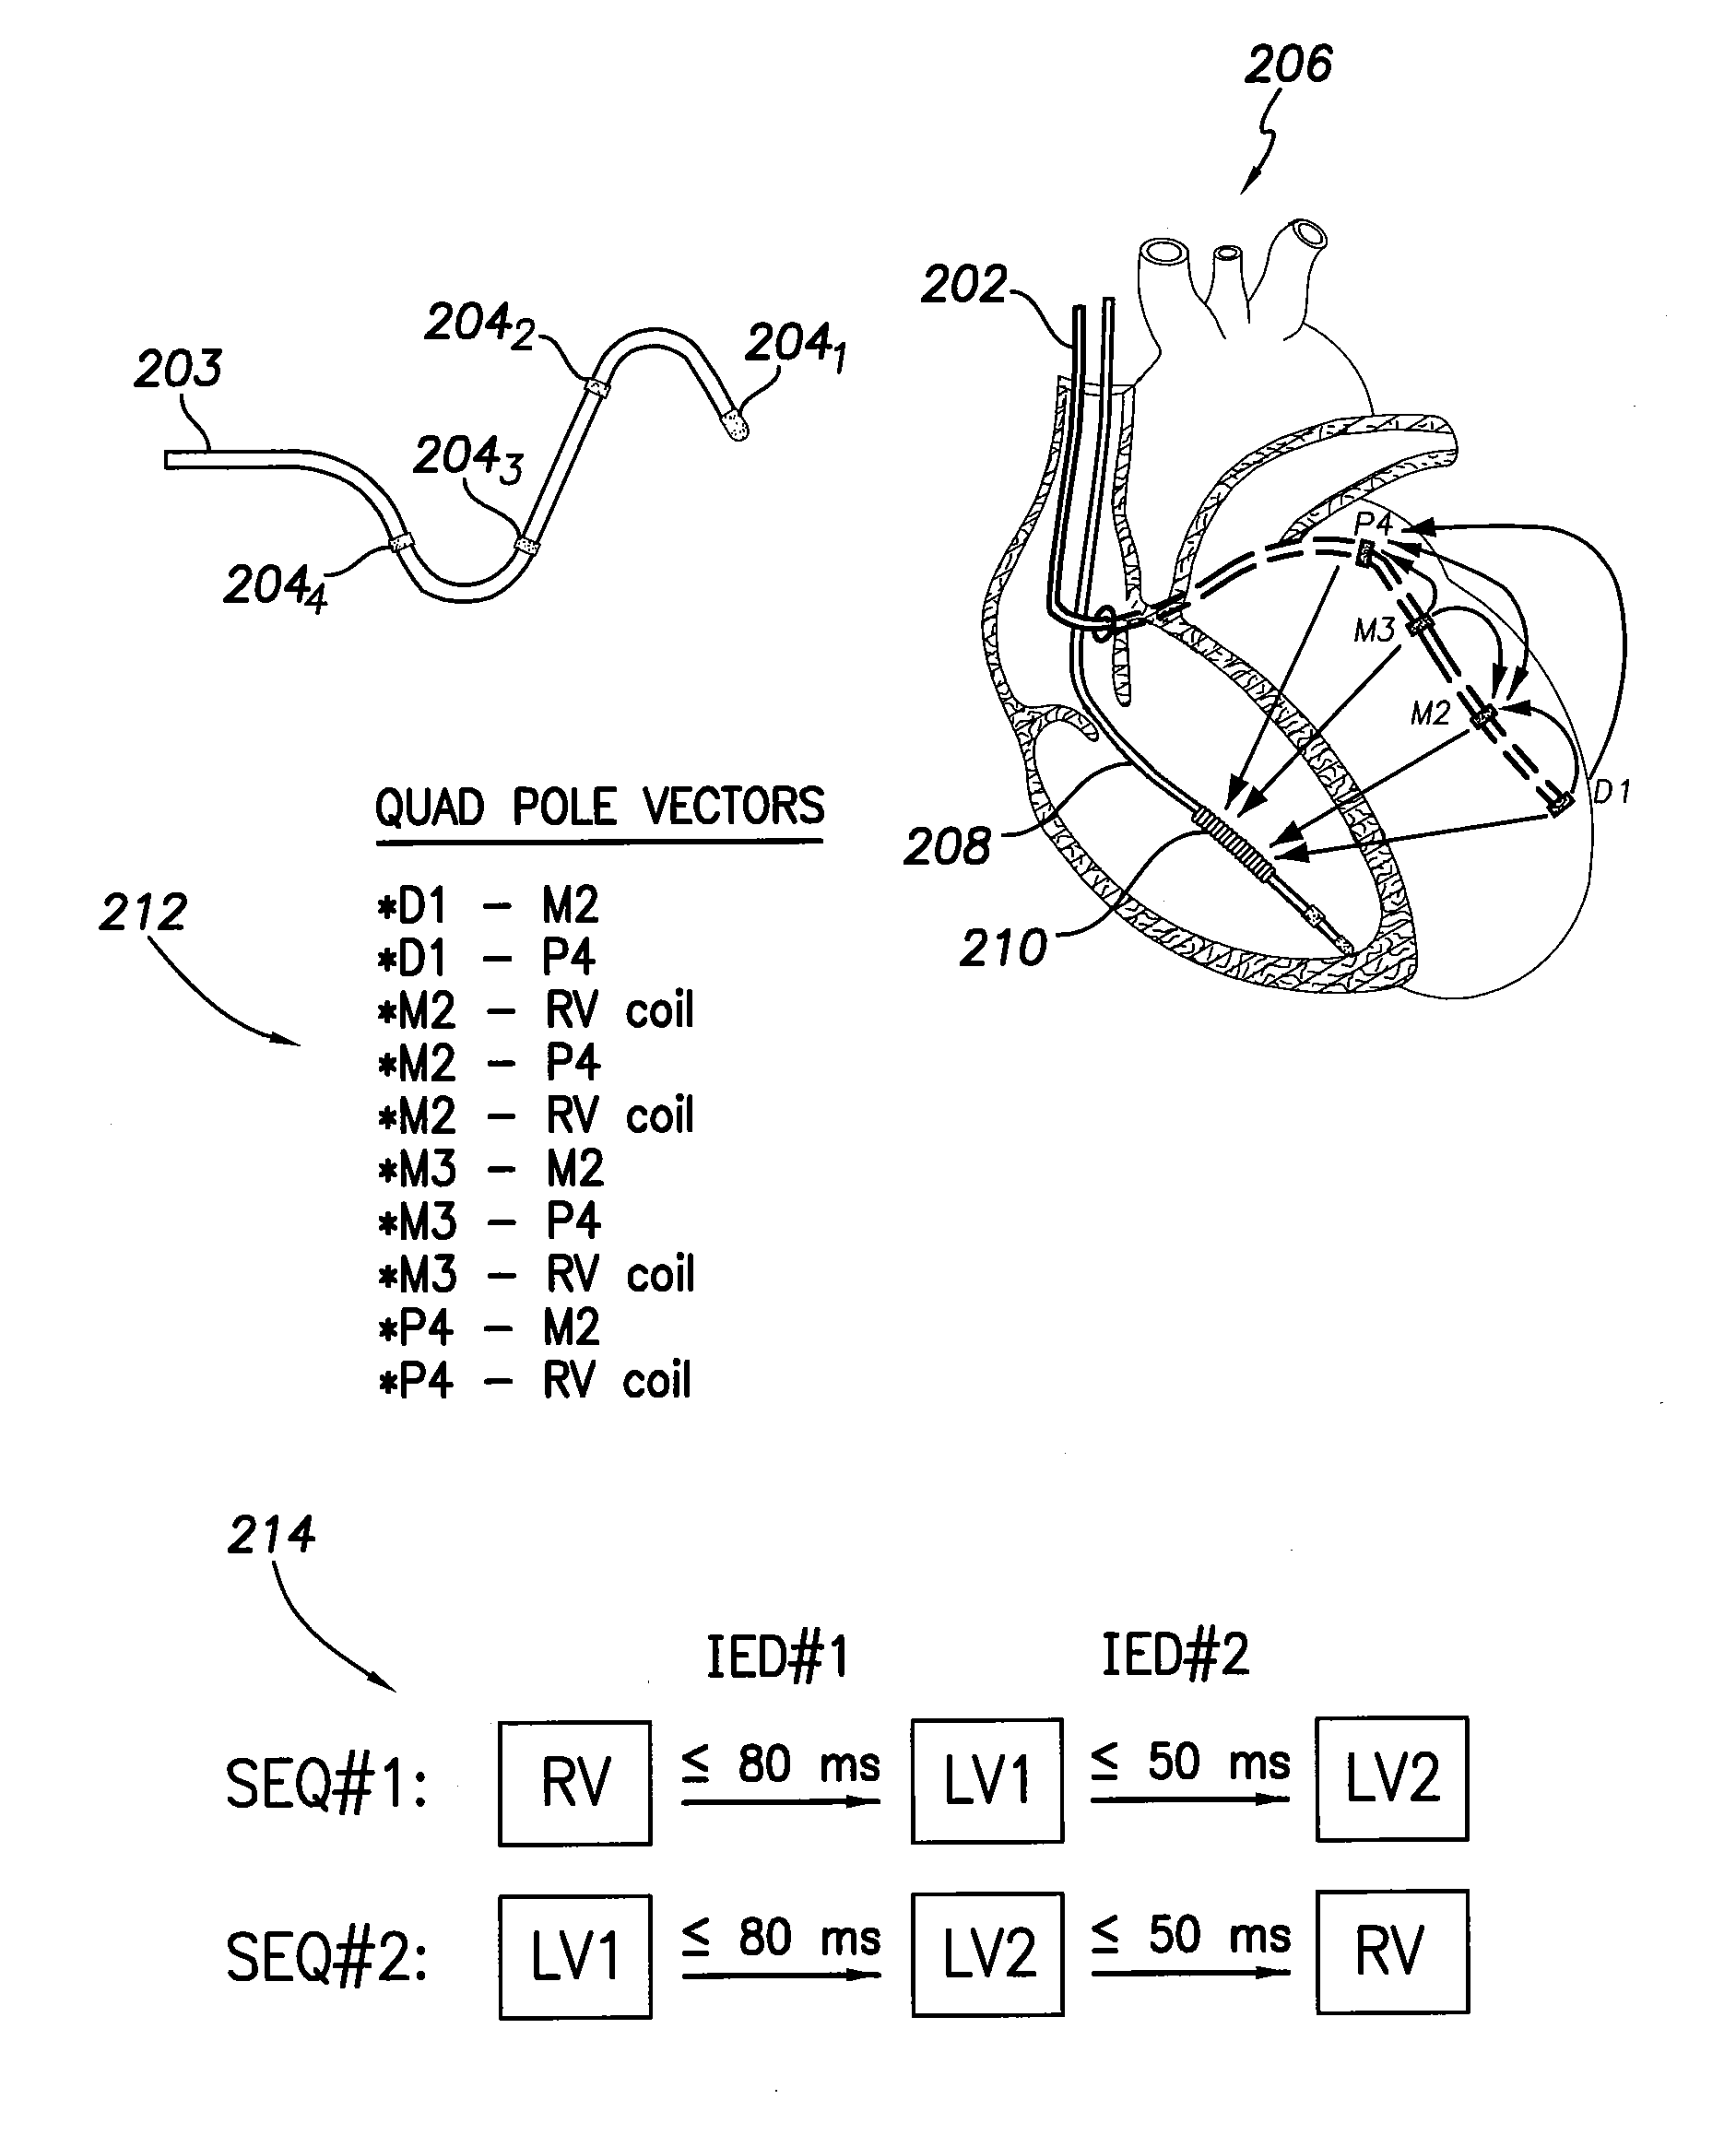 Systems and methods for selectively limiting multi-site ventricular pacing delays during optimization of cardiac resynchronization therapy parameters